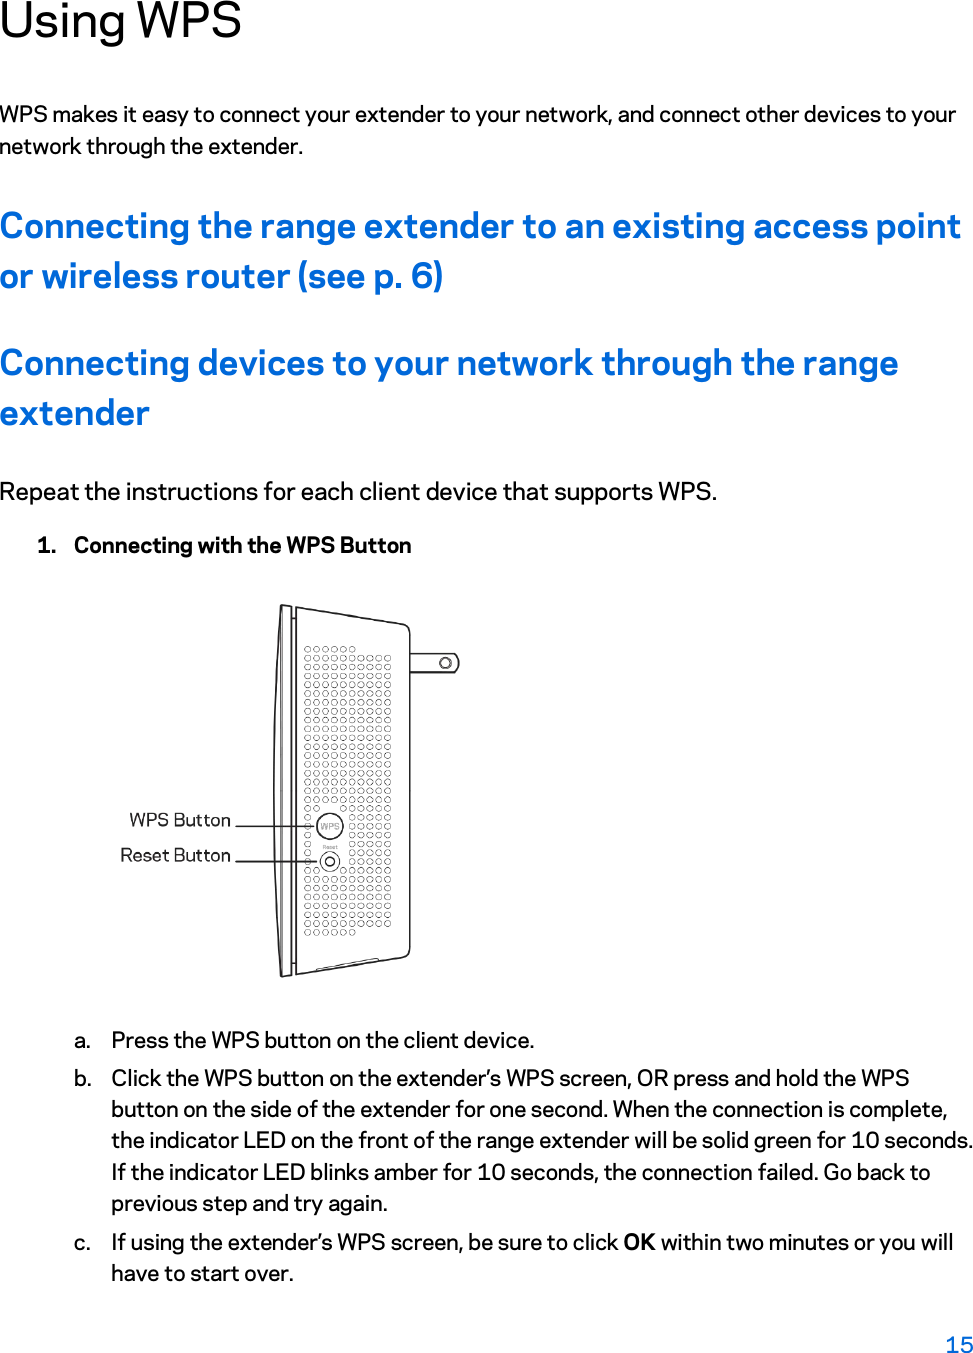 Using WPS WPS makes it easy to connect your extender to your network, and connect other devices to your network through the extender.  Connecting the range extender to an existing access point or wireless router (see p. 6) Connecting devices to your network through the range extender Repeat the instructions for each client device that supports WPS. 1. Connecting with the WPS Button  a. Press the WPS button on the client device. b. Click the WPS button on the extender’s WPS screen, OR press and hold the WPS button on the side of the extender for one second. When the connection is complete, the indicator LED on the front of the range extender will be solid green for 10 seconds. If the indicator LED blinks amber for 10 seconds, the connection failed. Go back to previous step and try again. c. If using the extender’s WPS screen, be sure to click OK within two minutes or you will have to start over. 15  